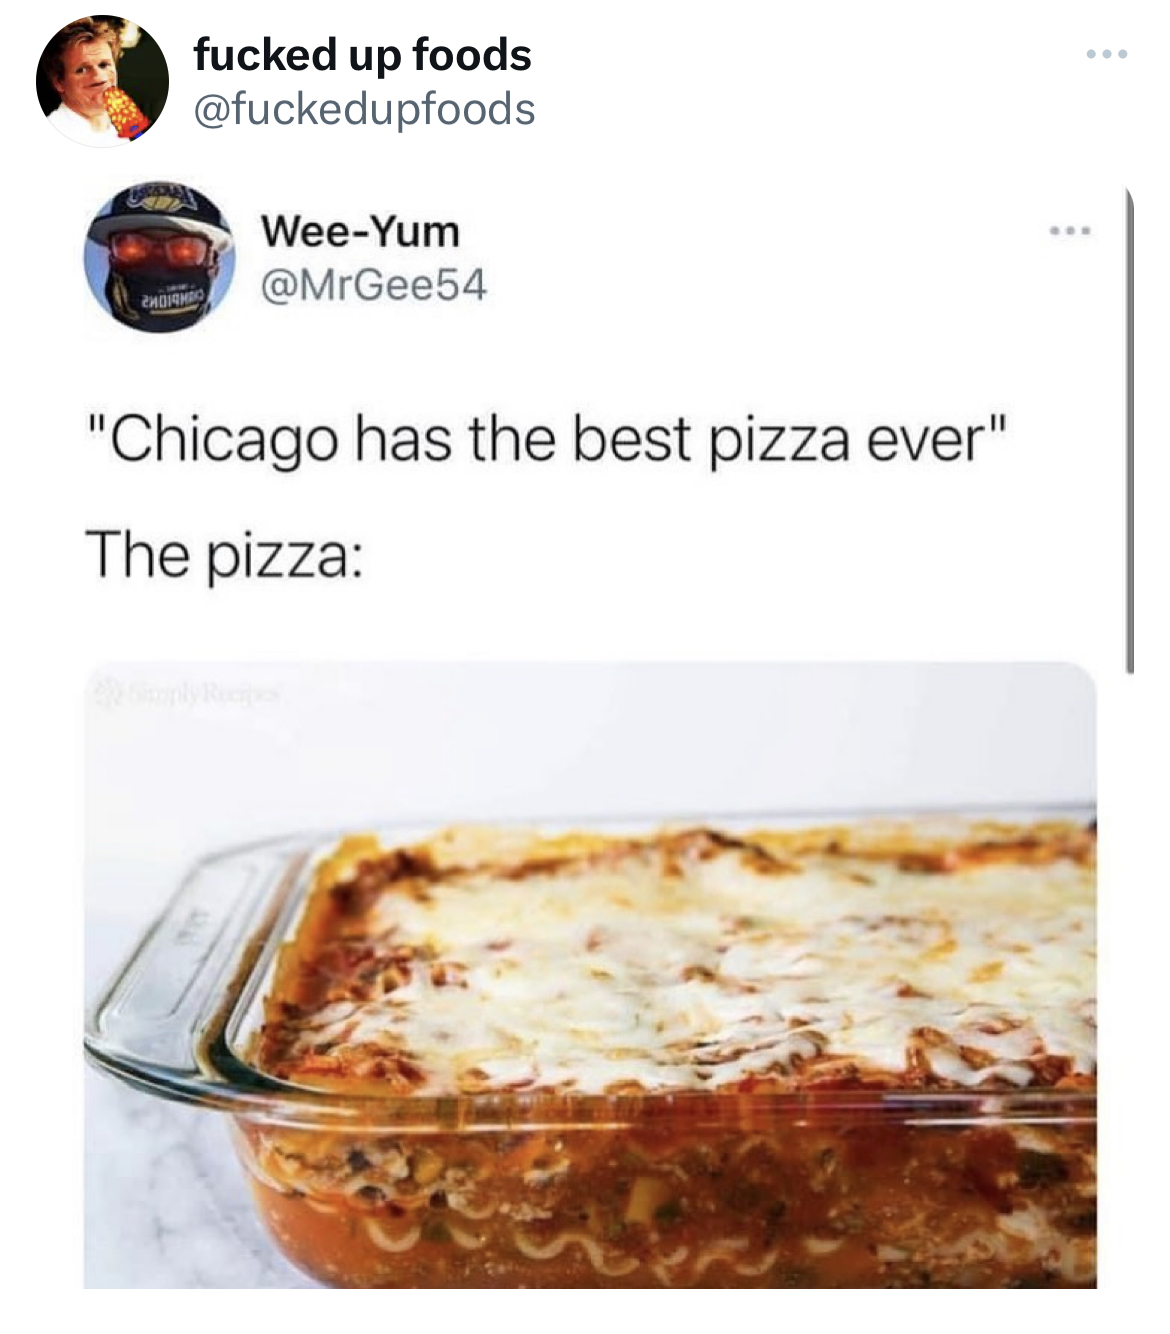 savage tweets - fucked up foods WeeYum "Chicago has the best pizza ever" The pizza